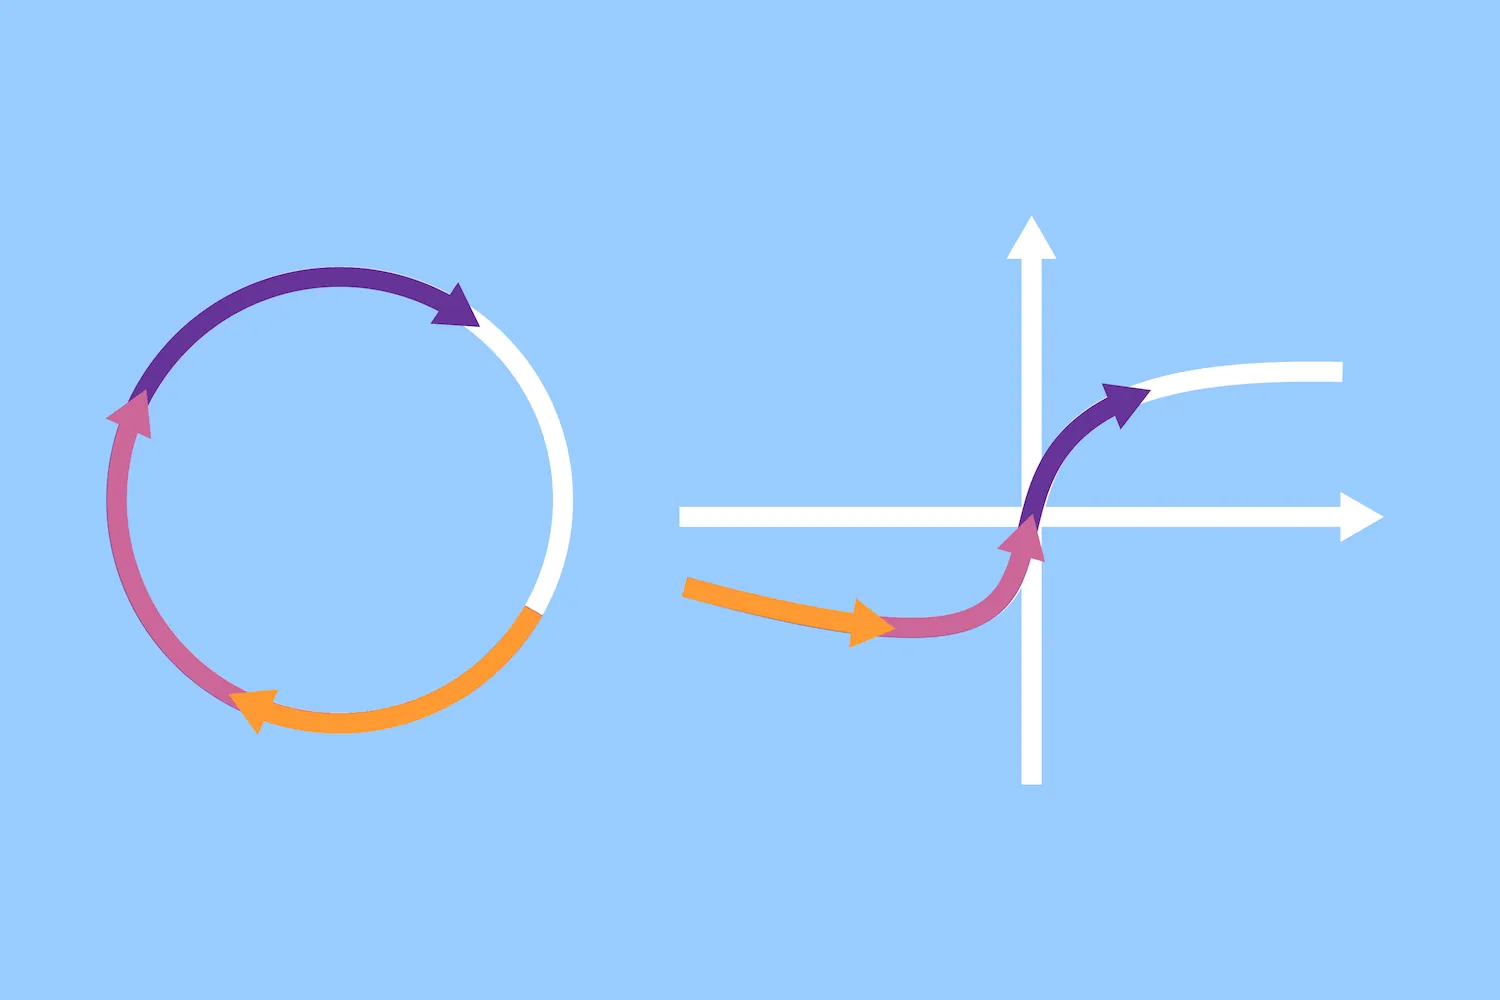 A circle and a Bézier curve animated with p5.animS